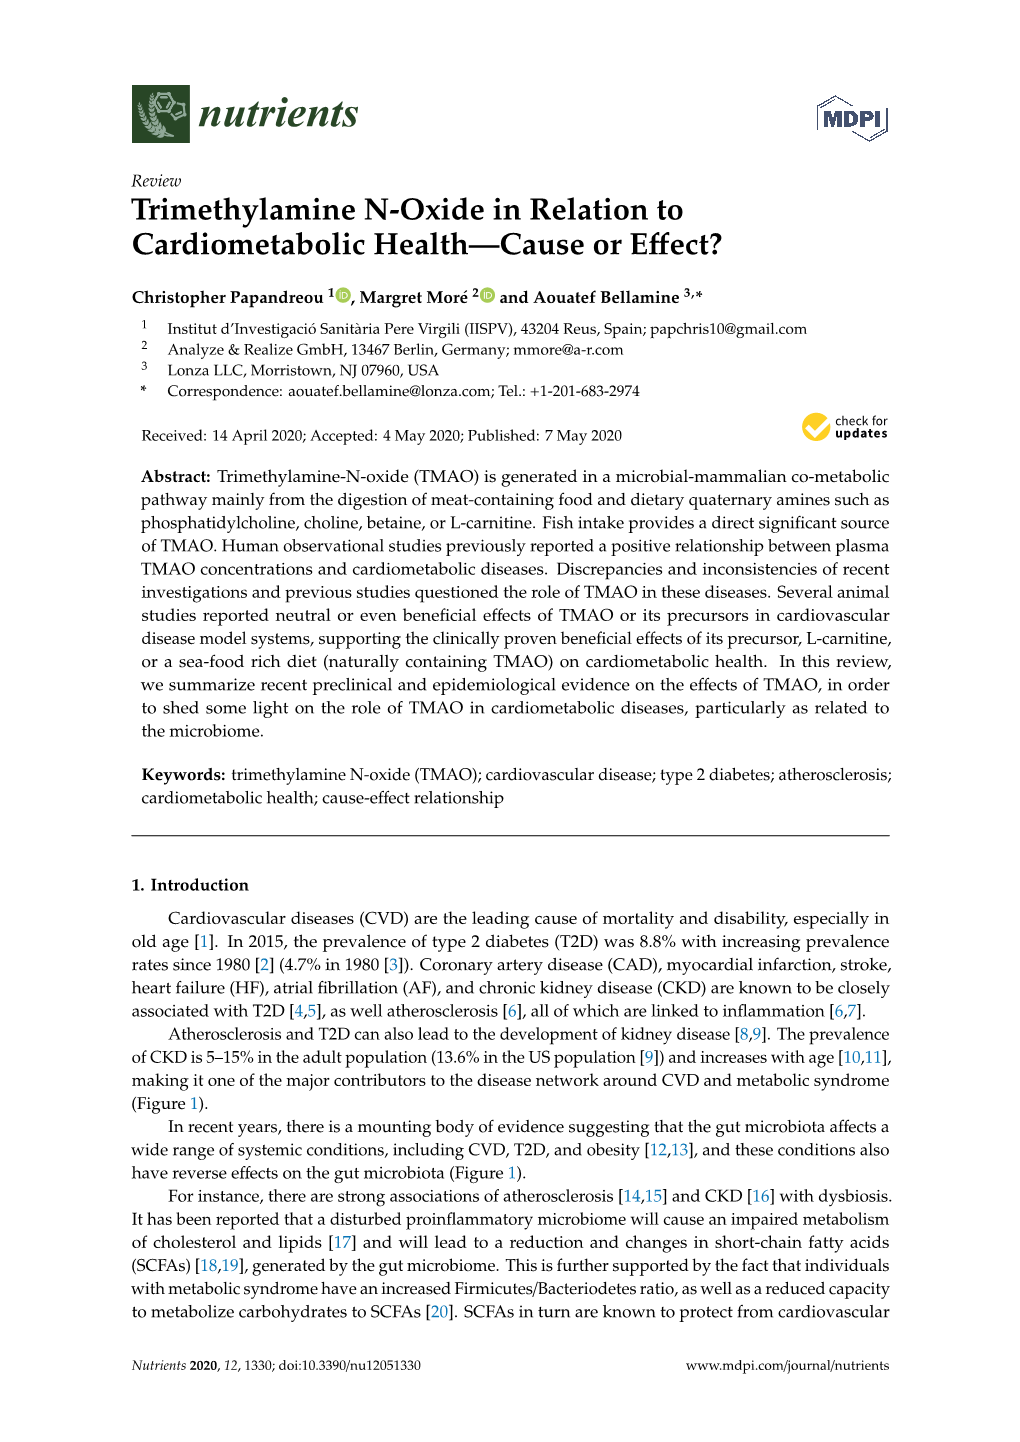 Trimethylamine N-Oxide in Relation to Cardiometabolic Health—Cause Or Eﬀect?